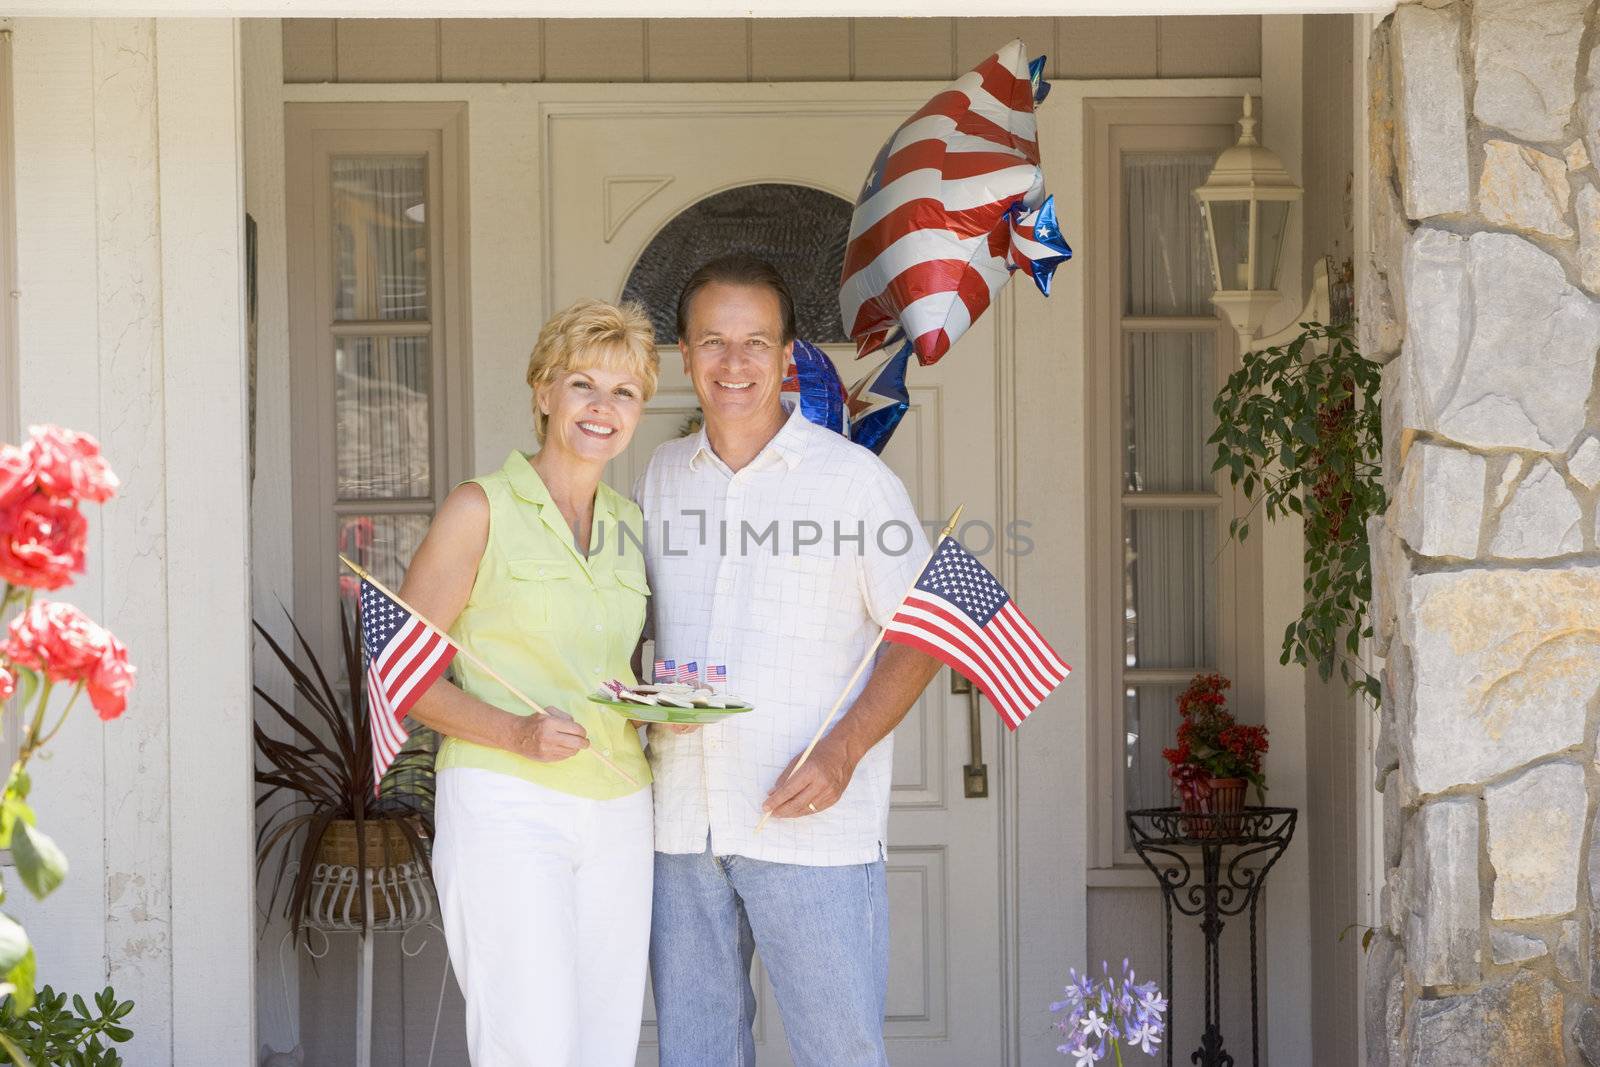 Couple at front door on fourth of July with flags and cookies sm by MonkeyBusiness